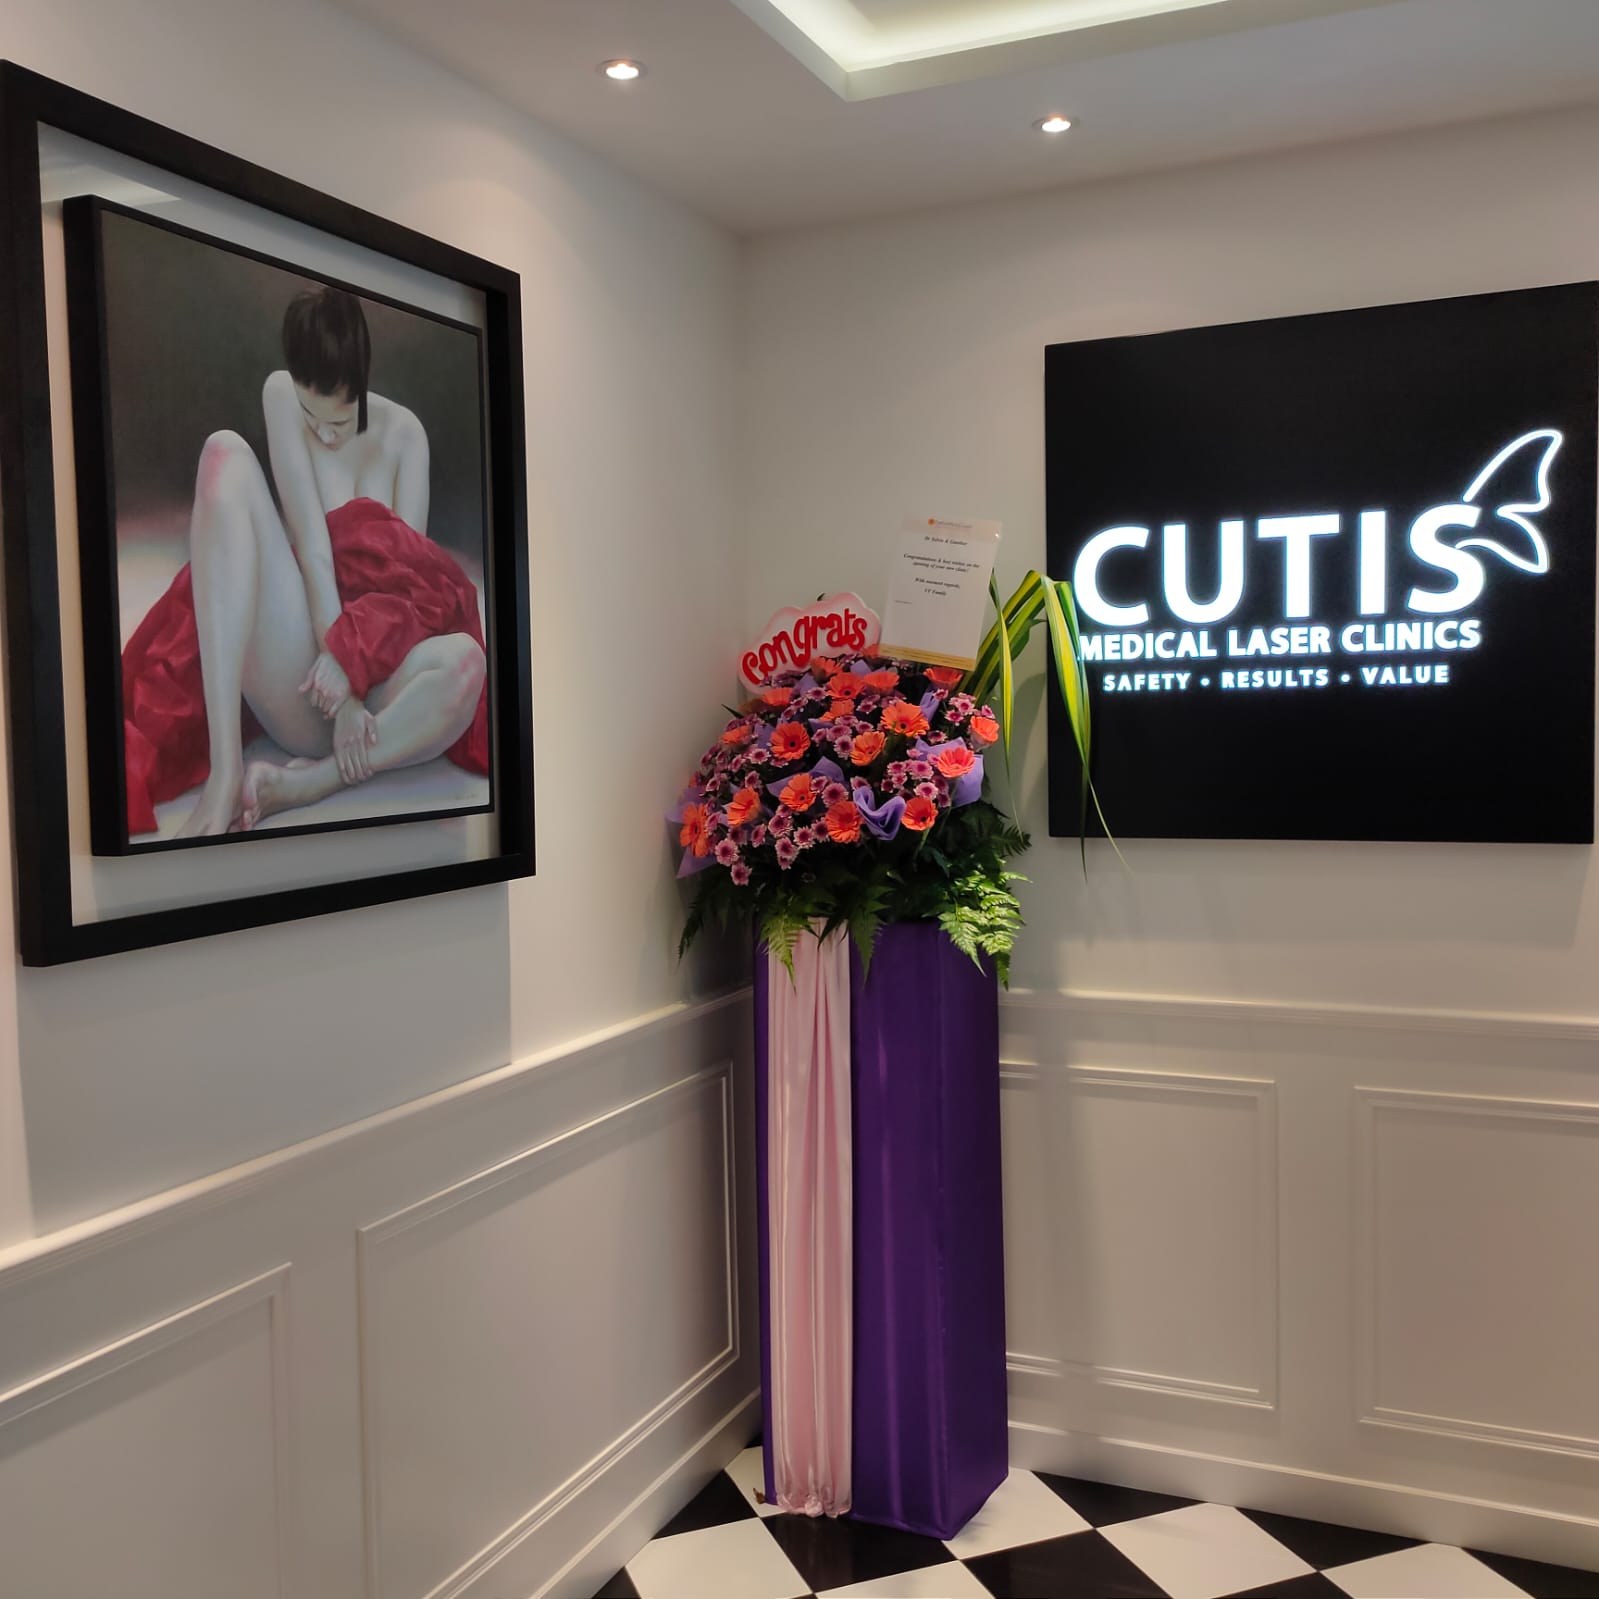 Cutis Medical Laser Clinics is Opening a New Unit at Scotts Medical Center – 0707